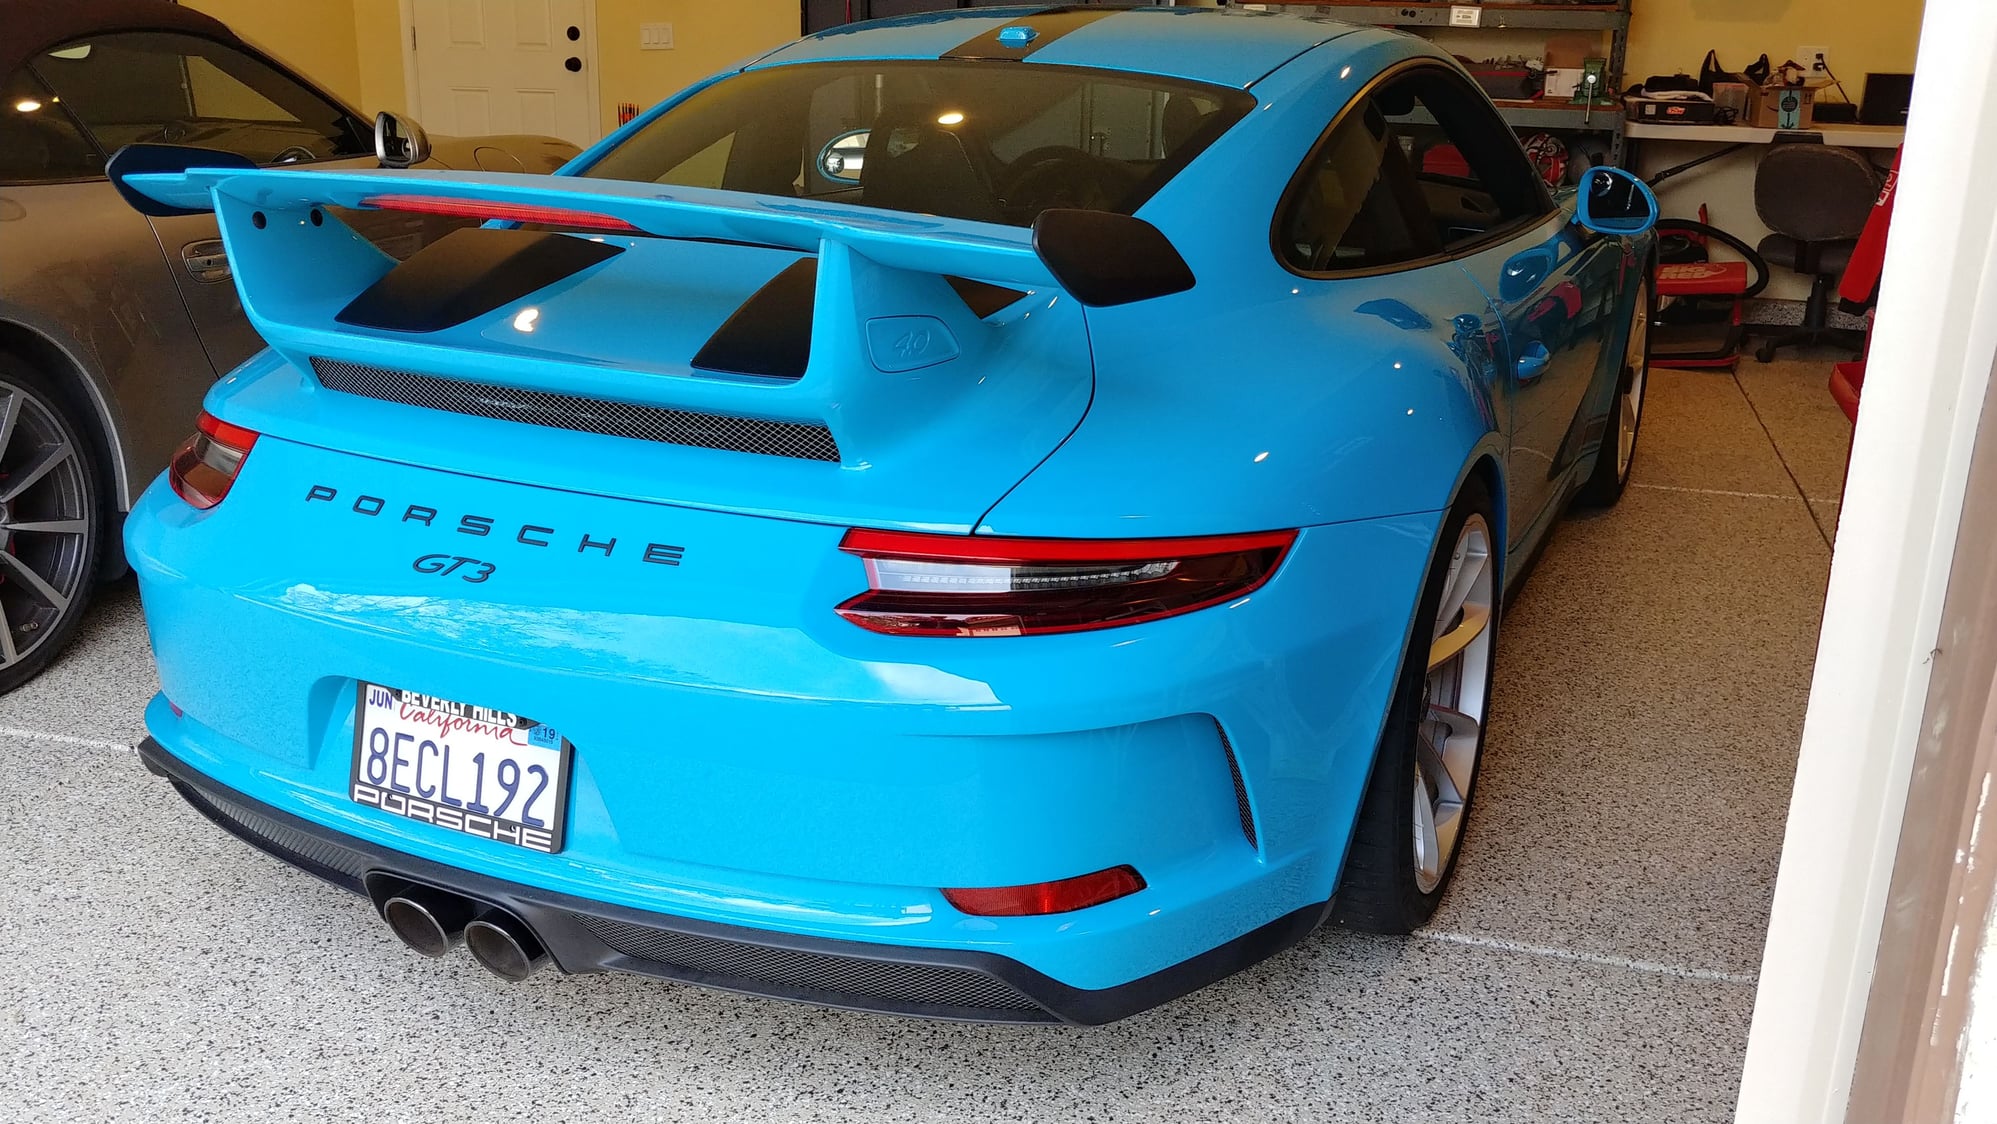 2018 Porsche GT3 - 2018 Miami Blue GT3 Manual - Used - VIN WP0AC2A92JS176011 - 1,020 Miles - 6 cyl - 2WD - Manual - Coupe - Blue - Rowland Heights, CA 91748, United States